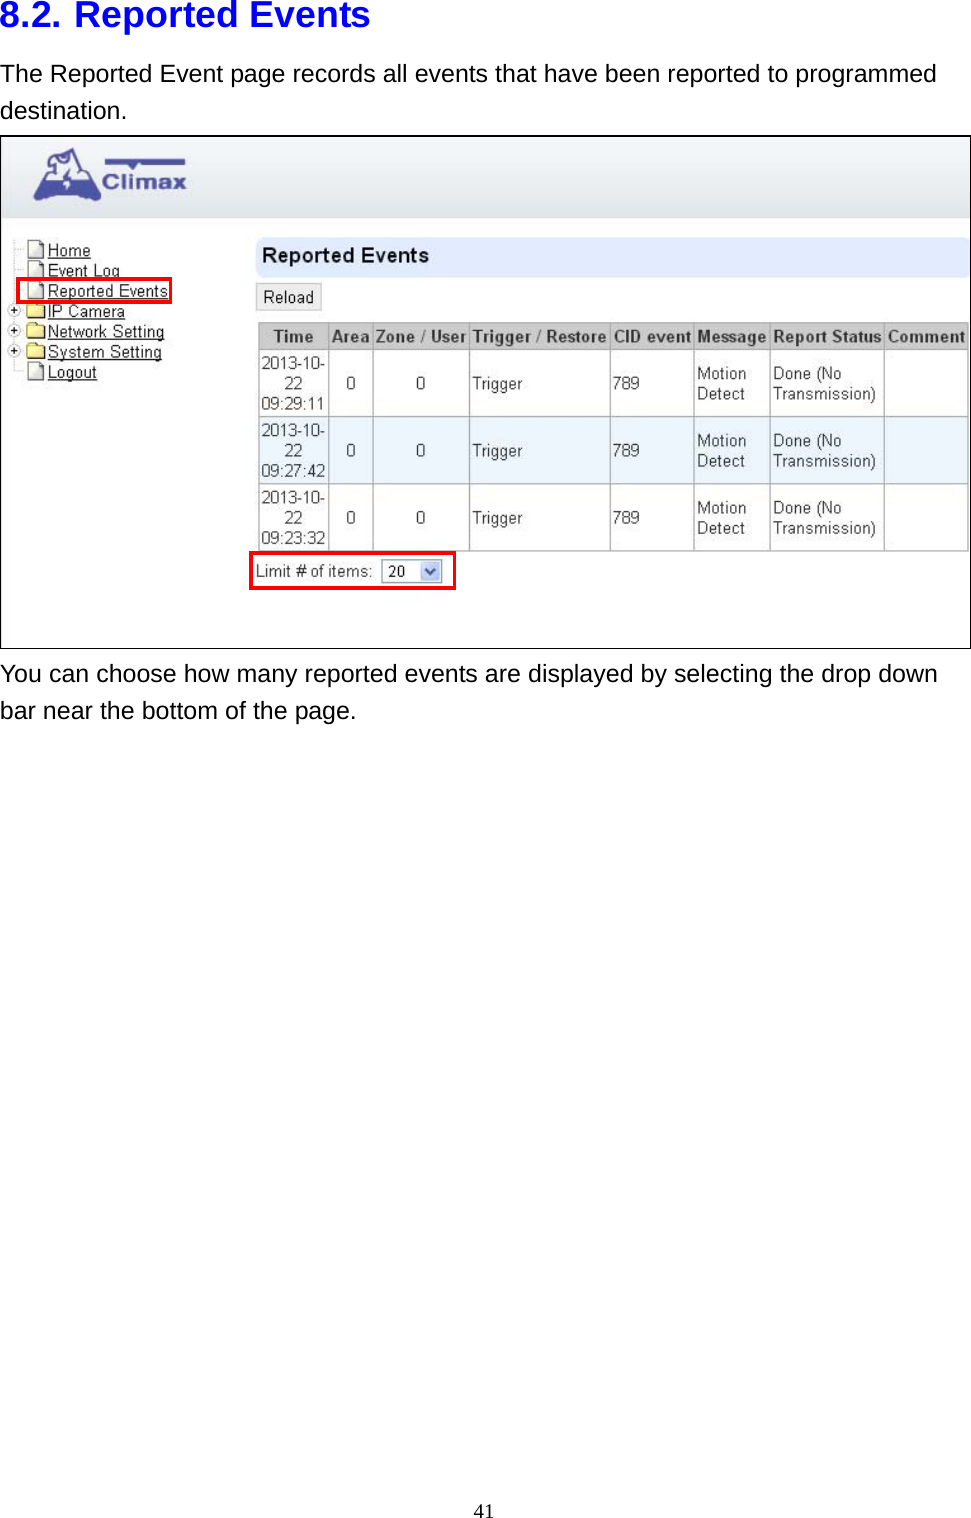 41  8.2. Reported Events The Reported Event page records all events that have been reported to programmed destination.  You can choose how many reported events are displayed by selecting the drop down bar near the bottom of the page.  